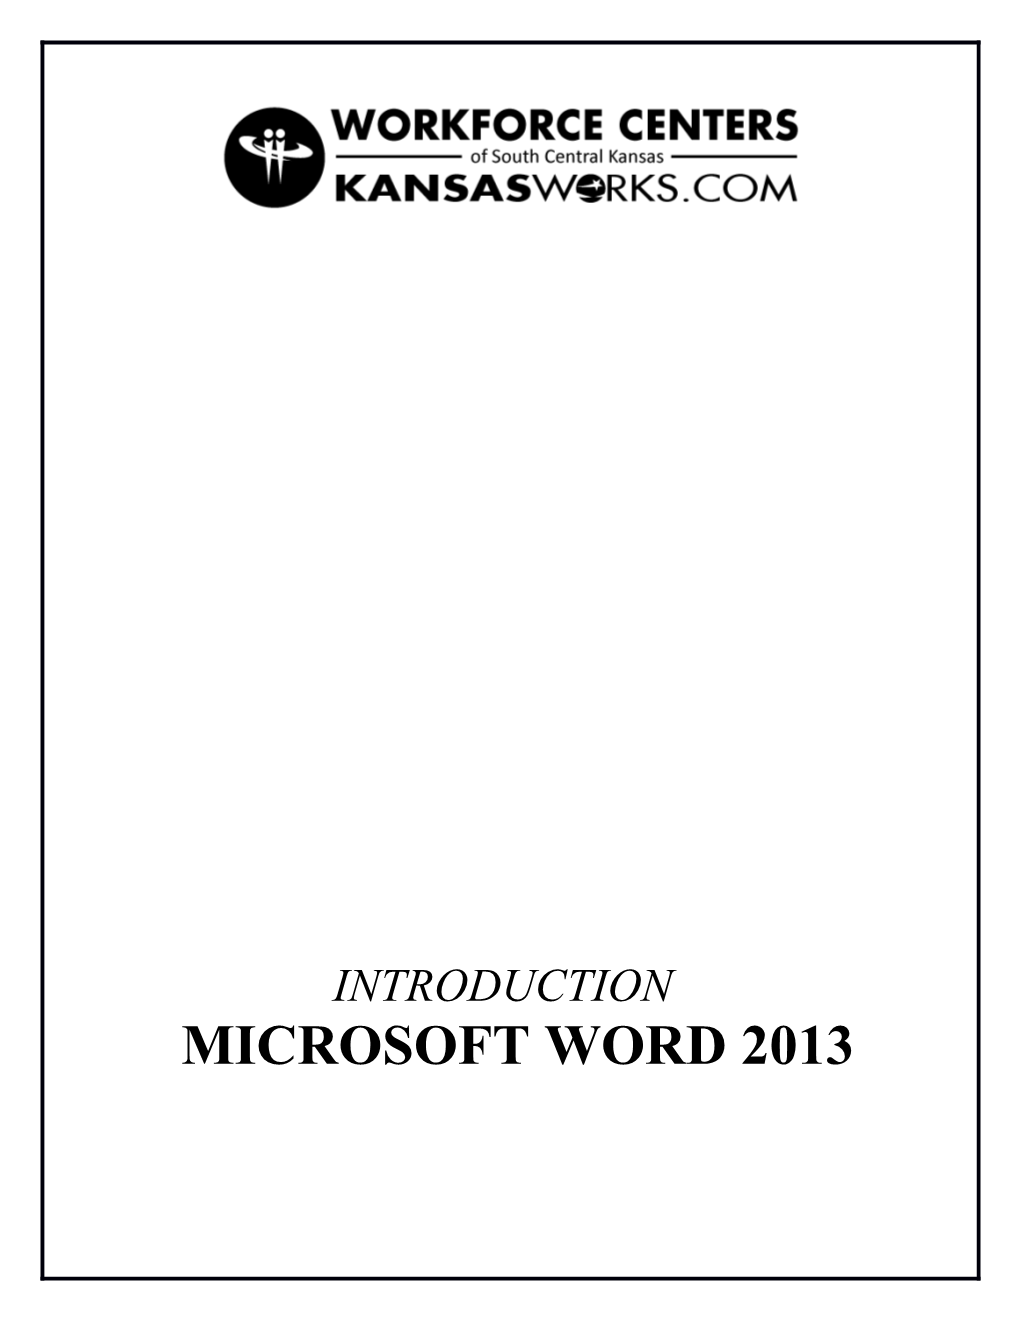 Introduction to Microsoft Word2013